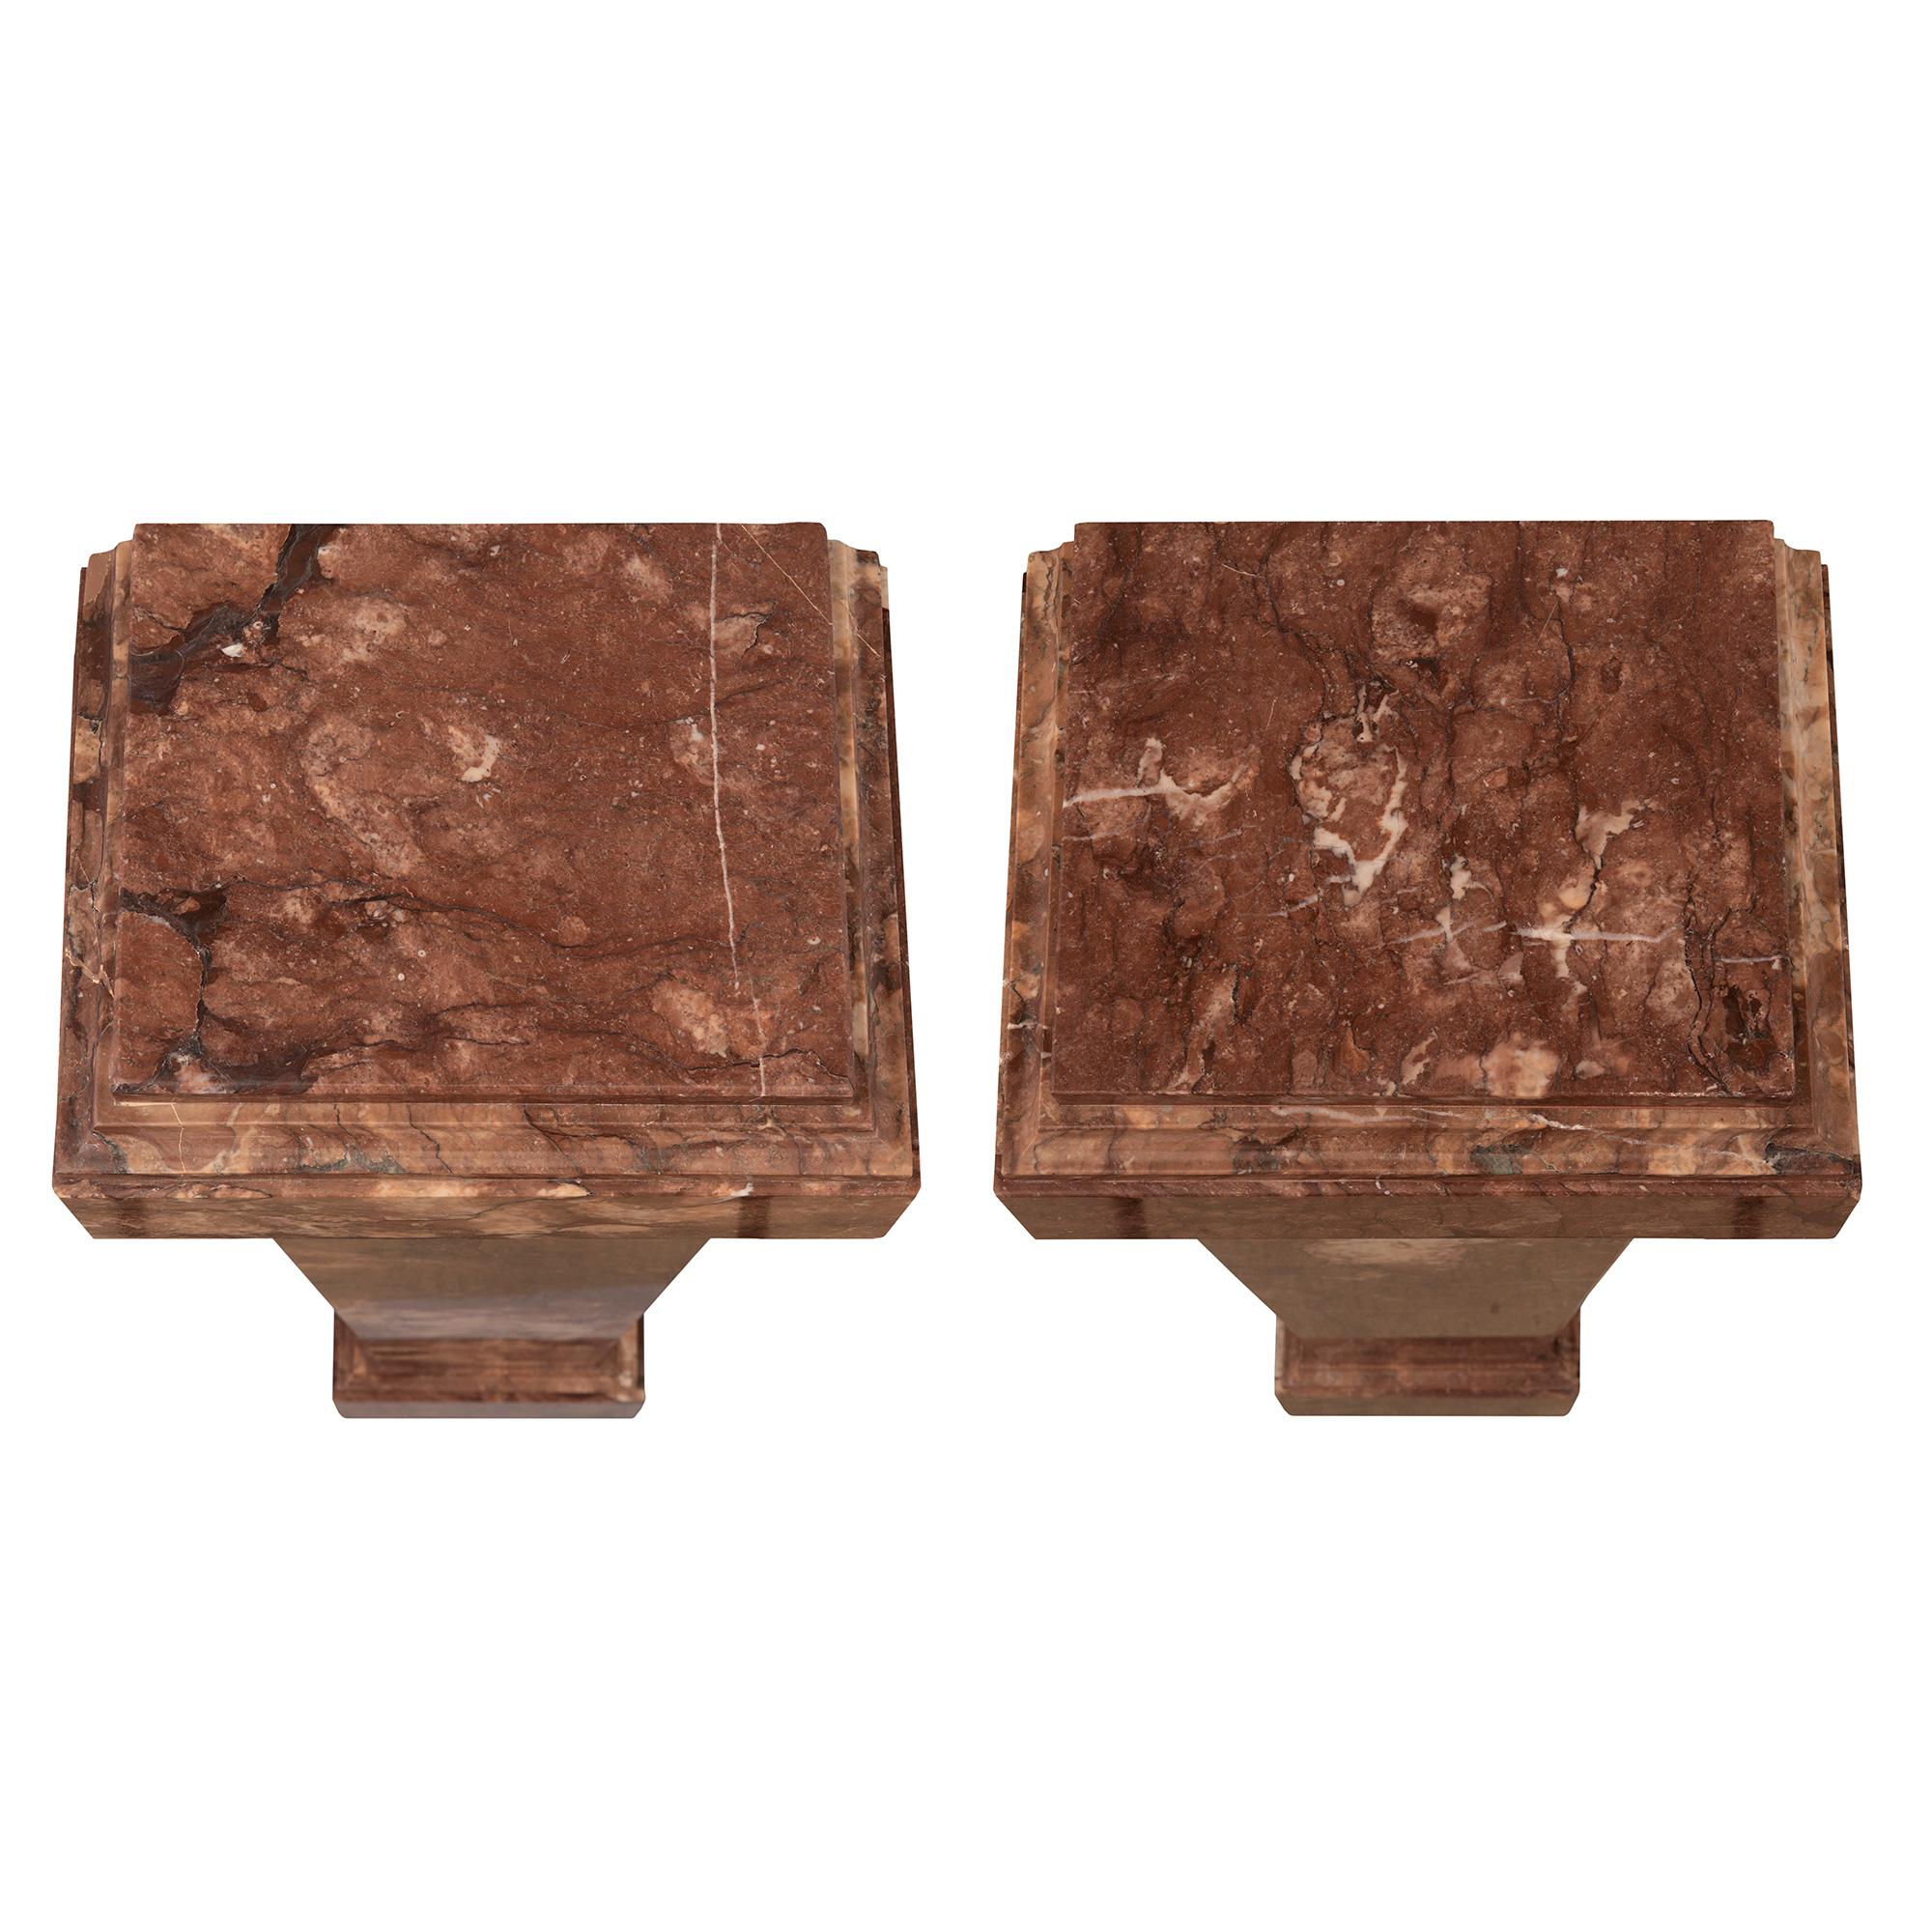 A beautiful pair of Italian 19th century neo-classical st. rouge marble pedestal columns. Each column is raised by a square base with a fine mottled border. The elegant lightly tapered square central supports display decorative cut corners while the